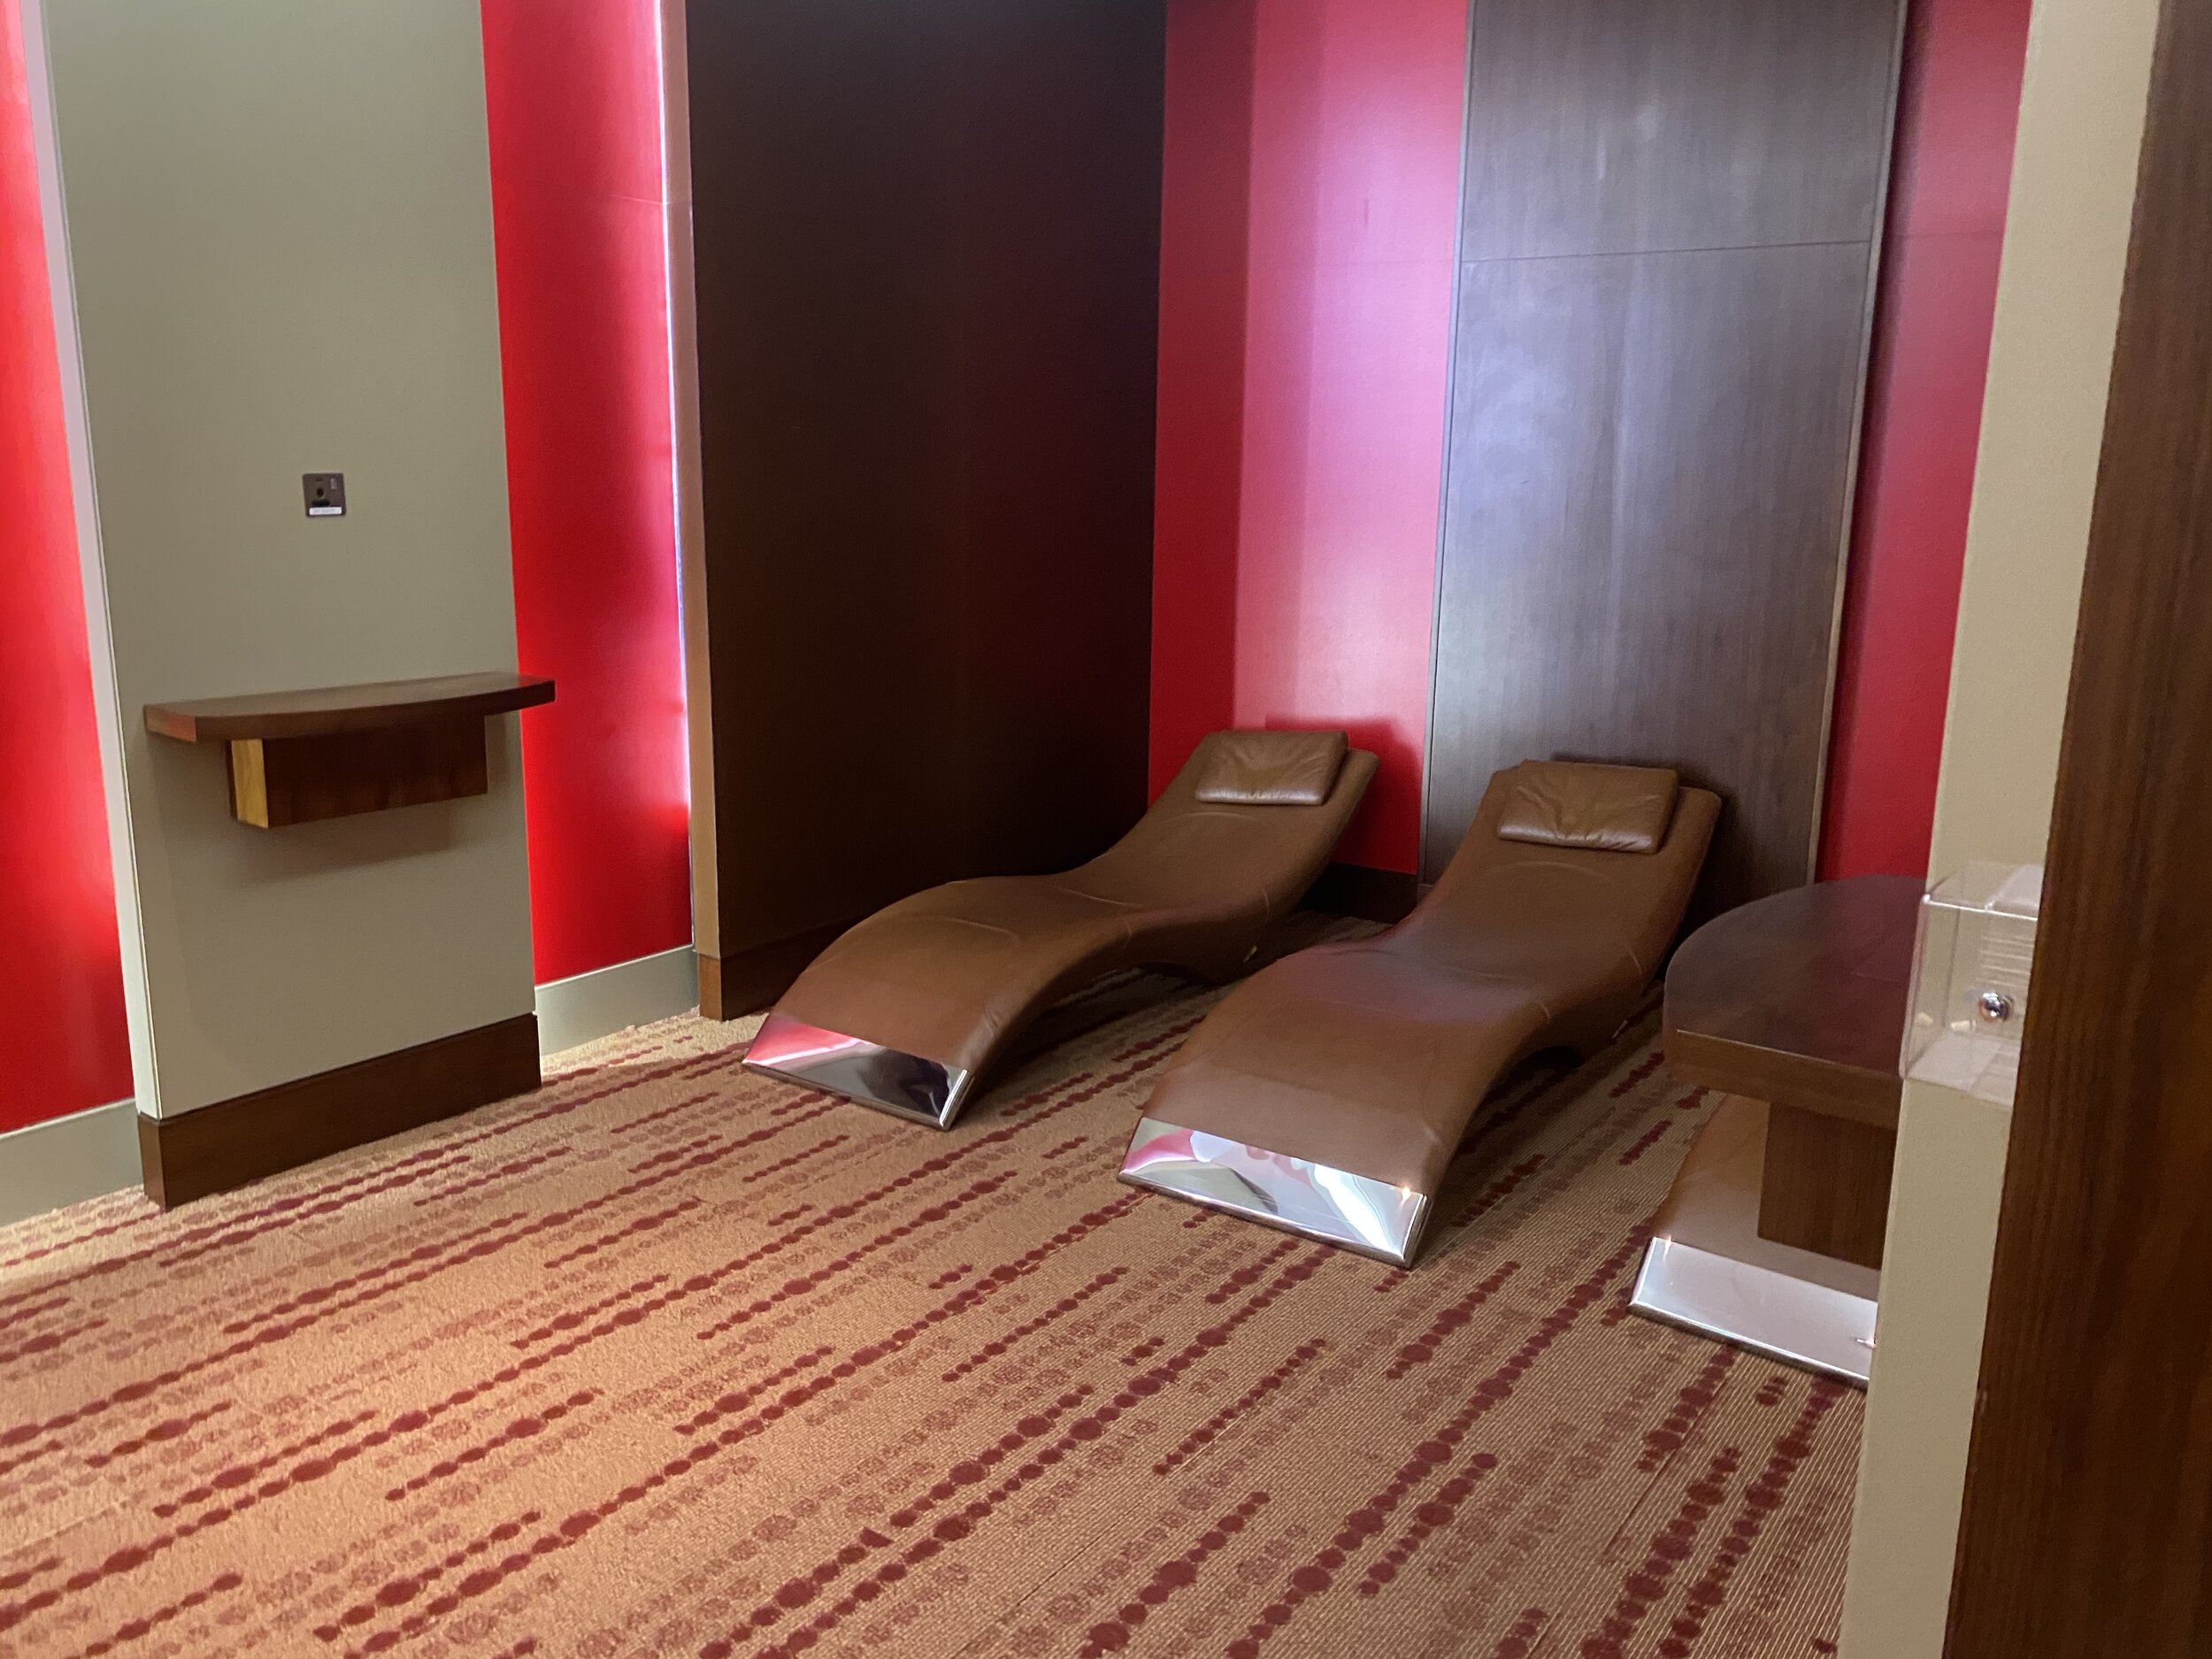 chairs in a room with red walls